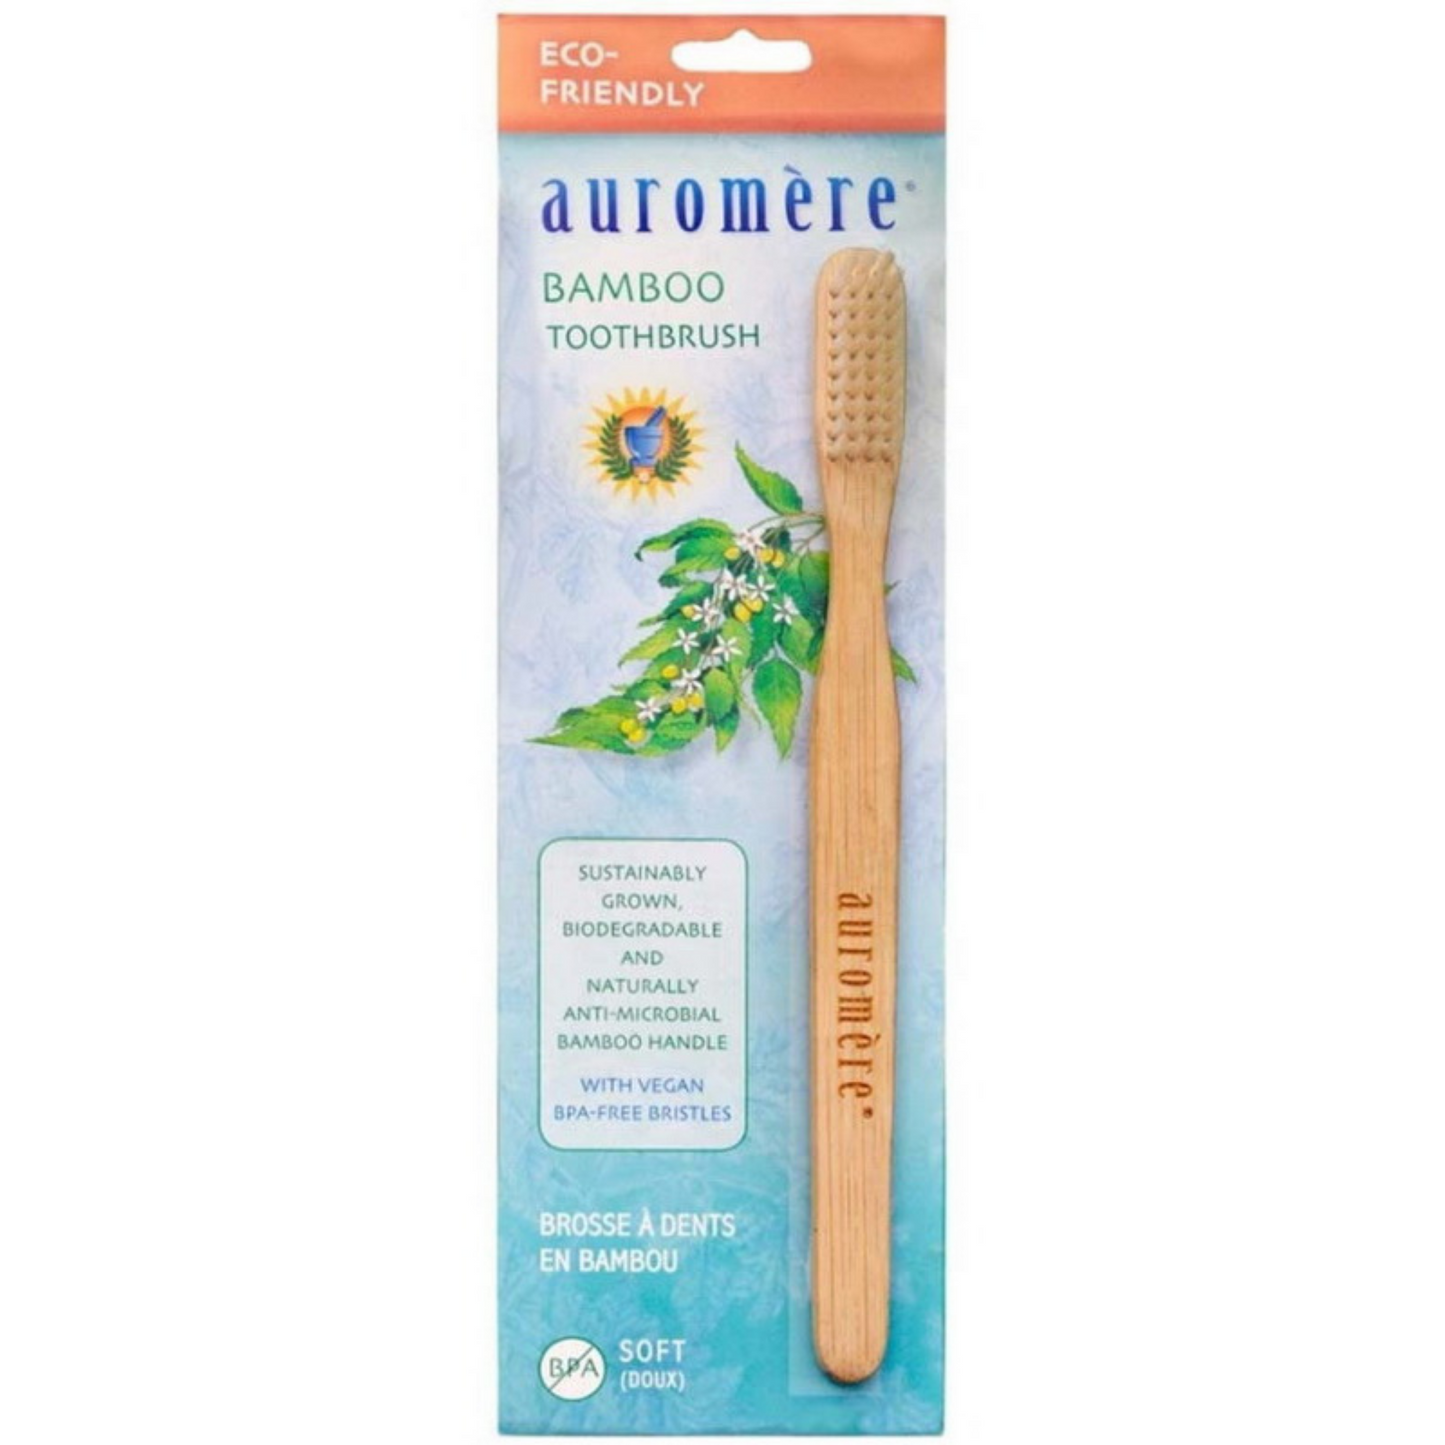 Primary Image of Bamboo Toothbrush